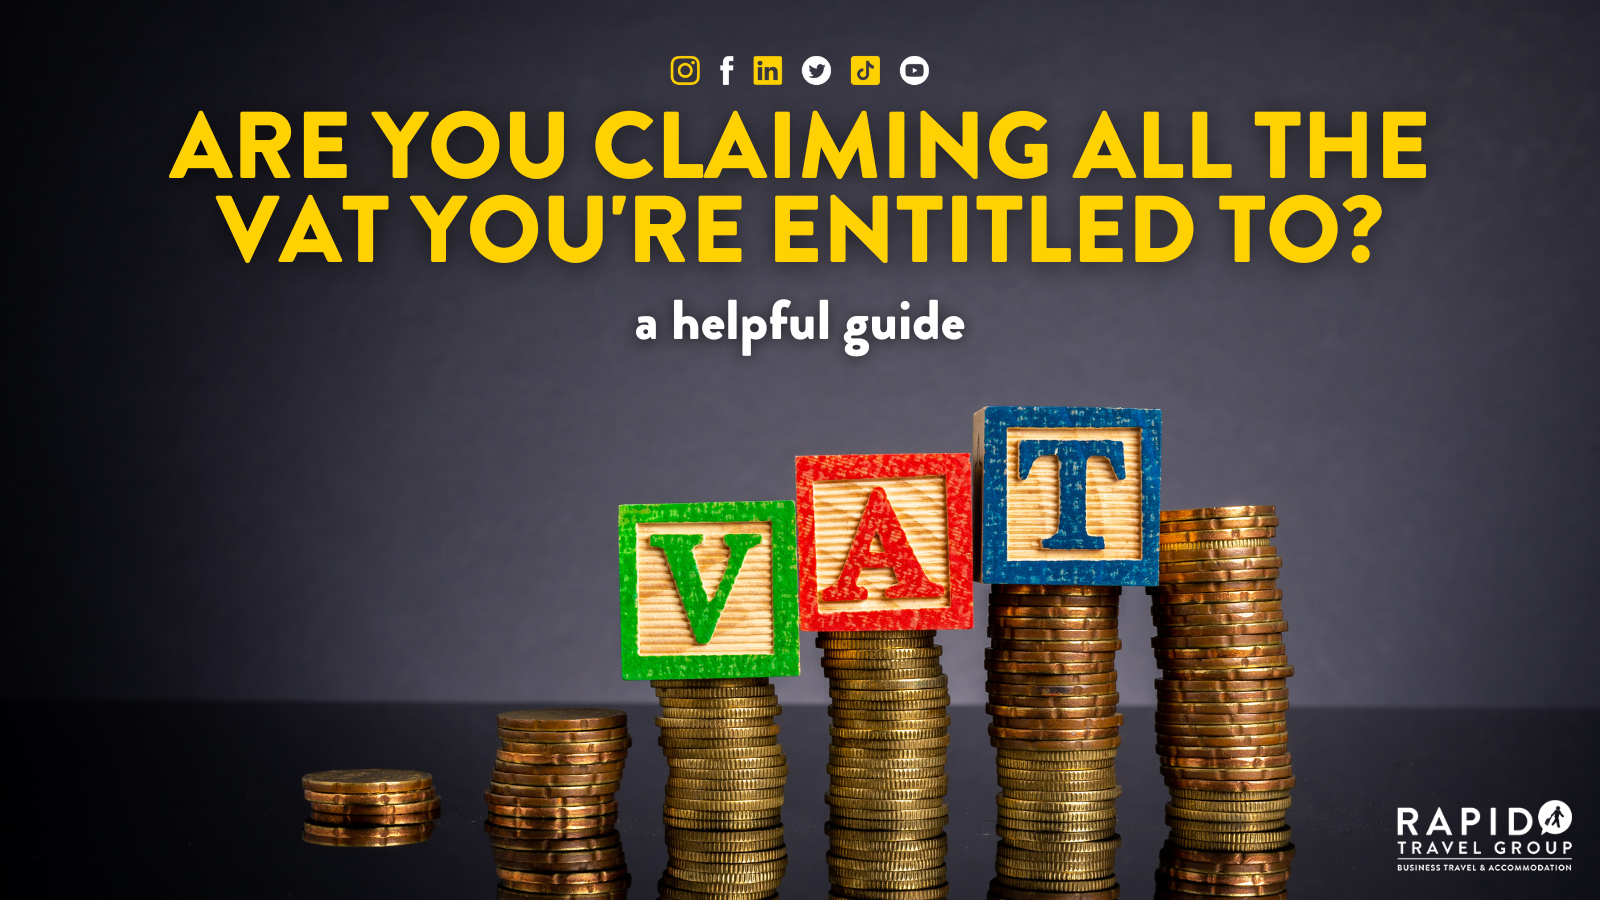 are you claiming all the vat you're entitled to? a helpful guide